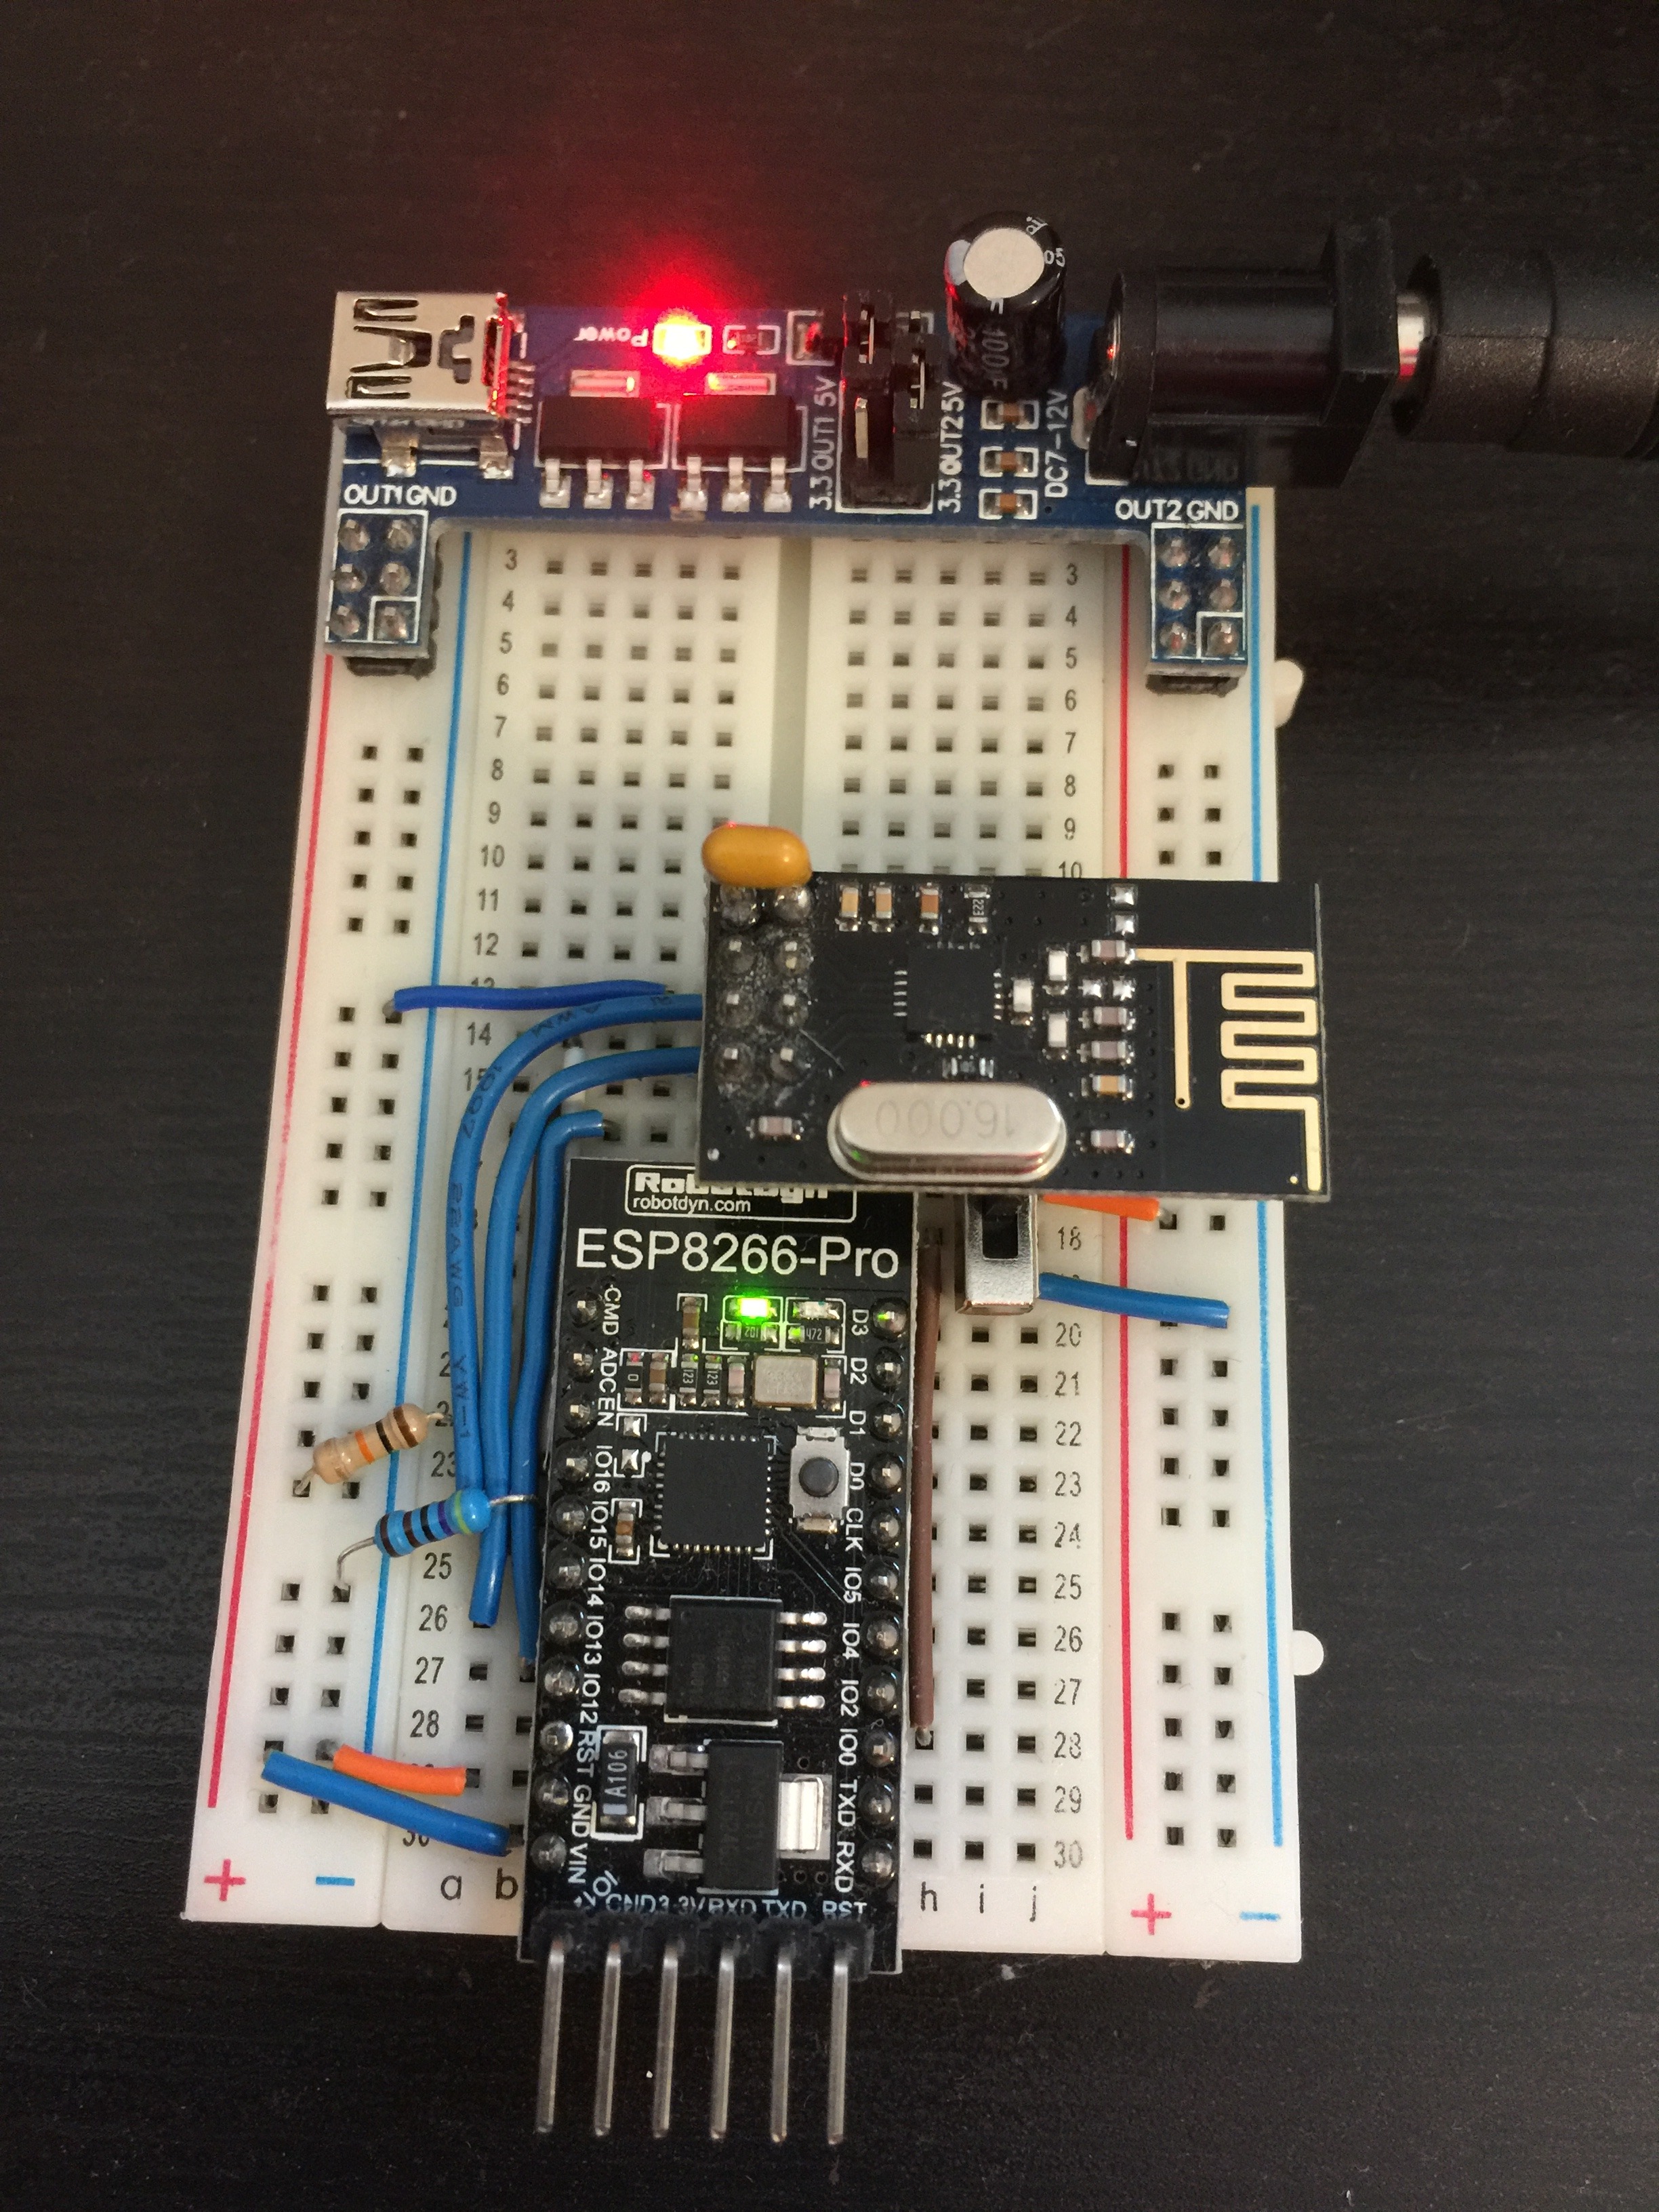 Basestation with ESP8266 MQTT client and NRF24L01 receiver.